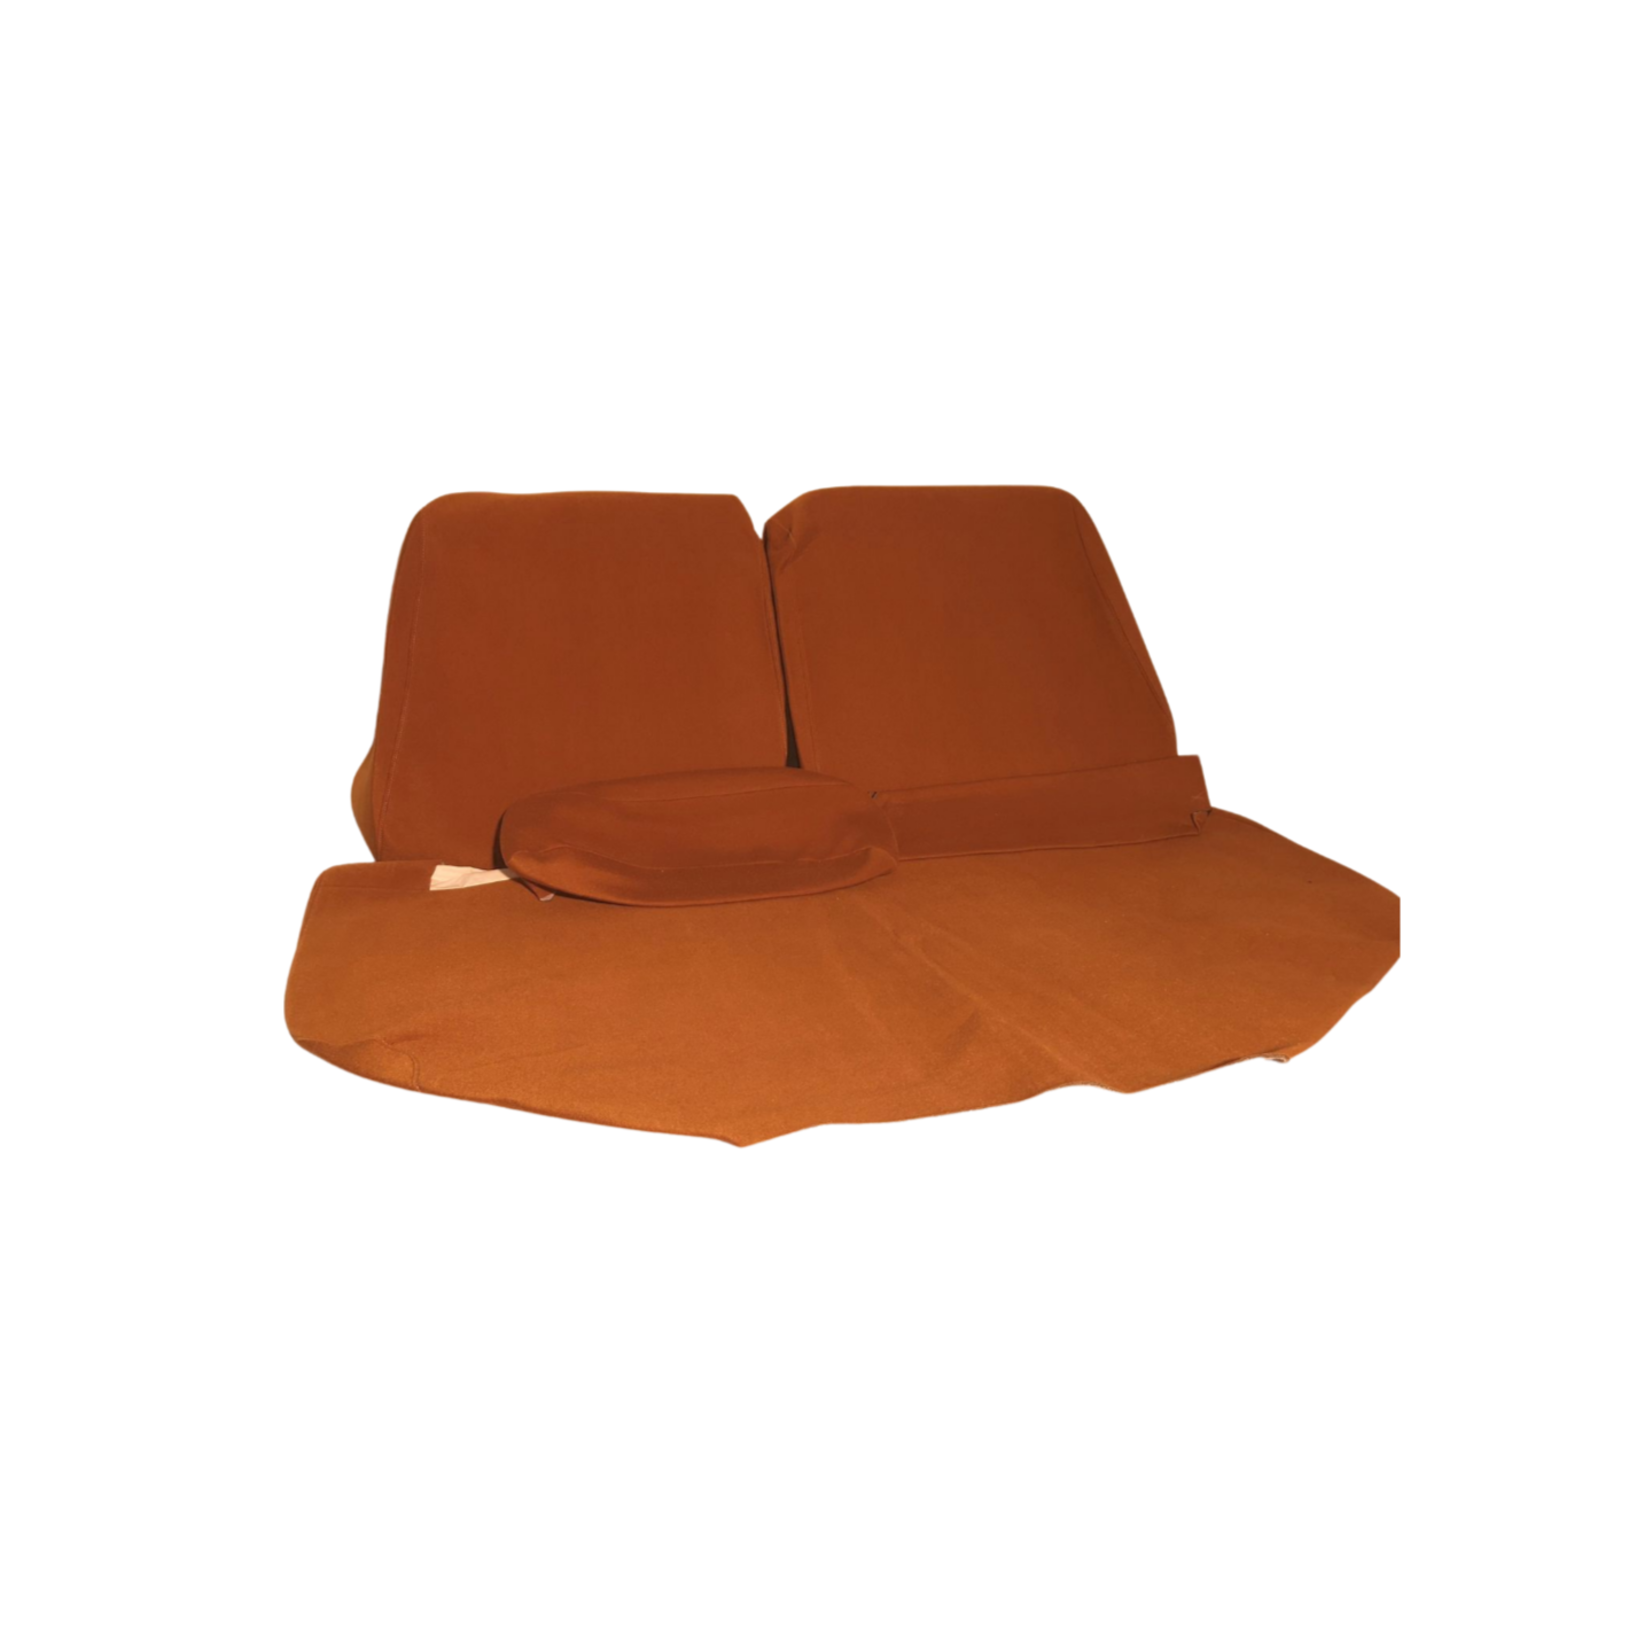 Upholstery set Jersey brown 1273 (with armrest bench 20cm) non Pallas 09/62-07/69 Nr Org: Interior - Image 1273